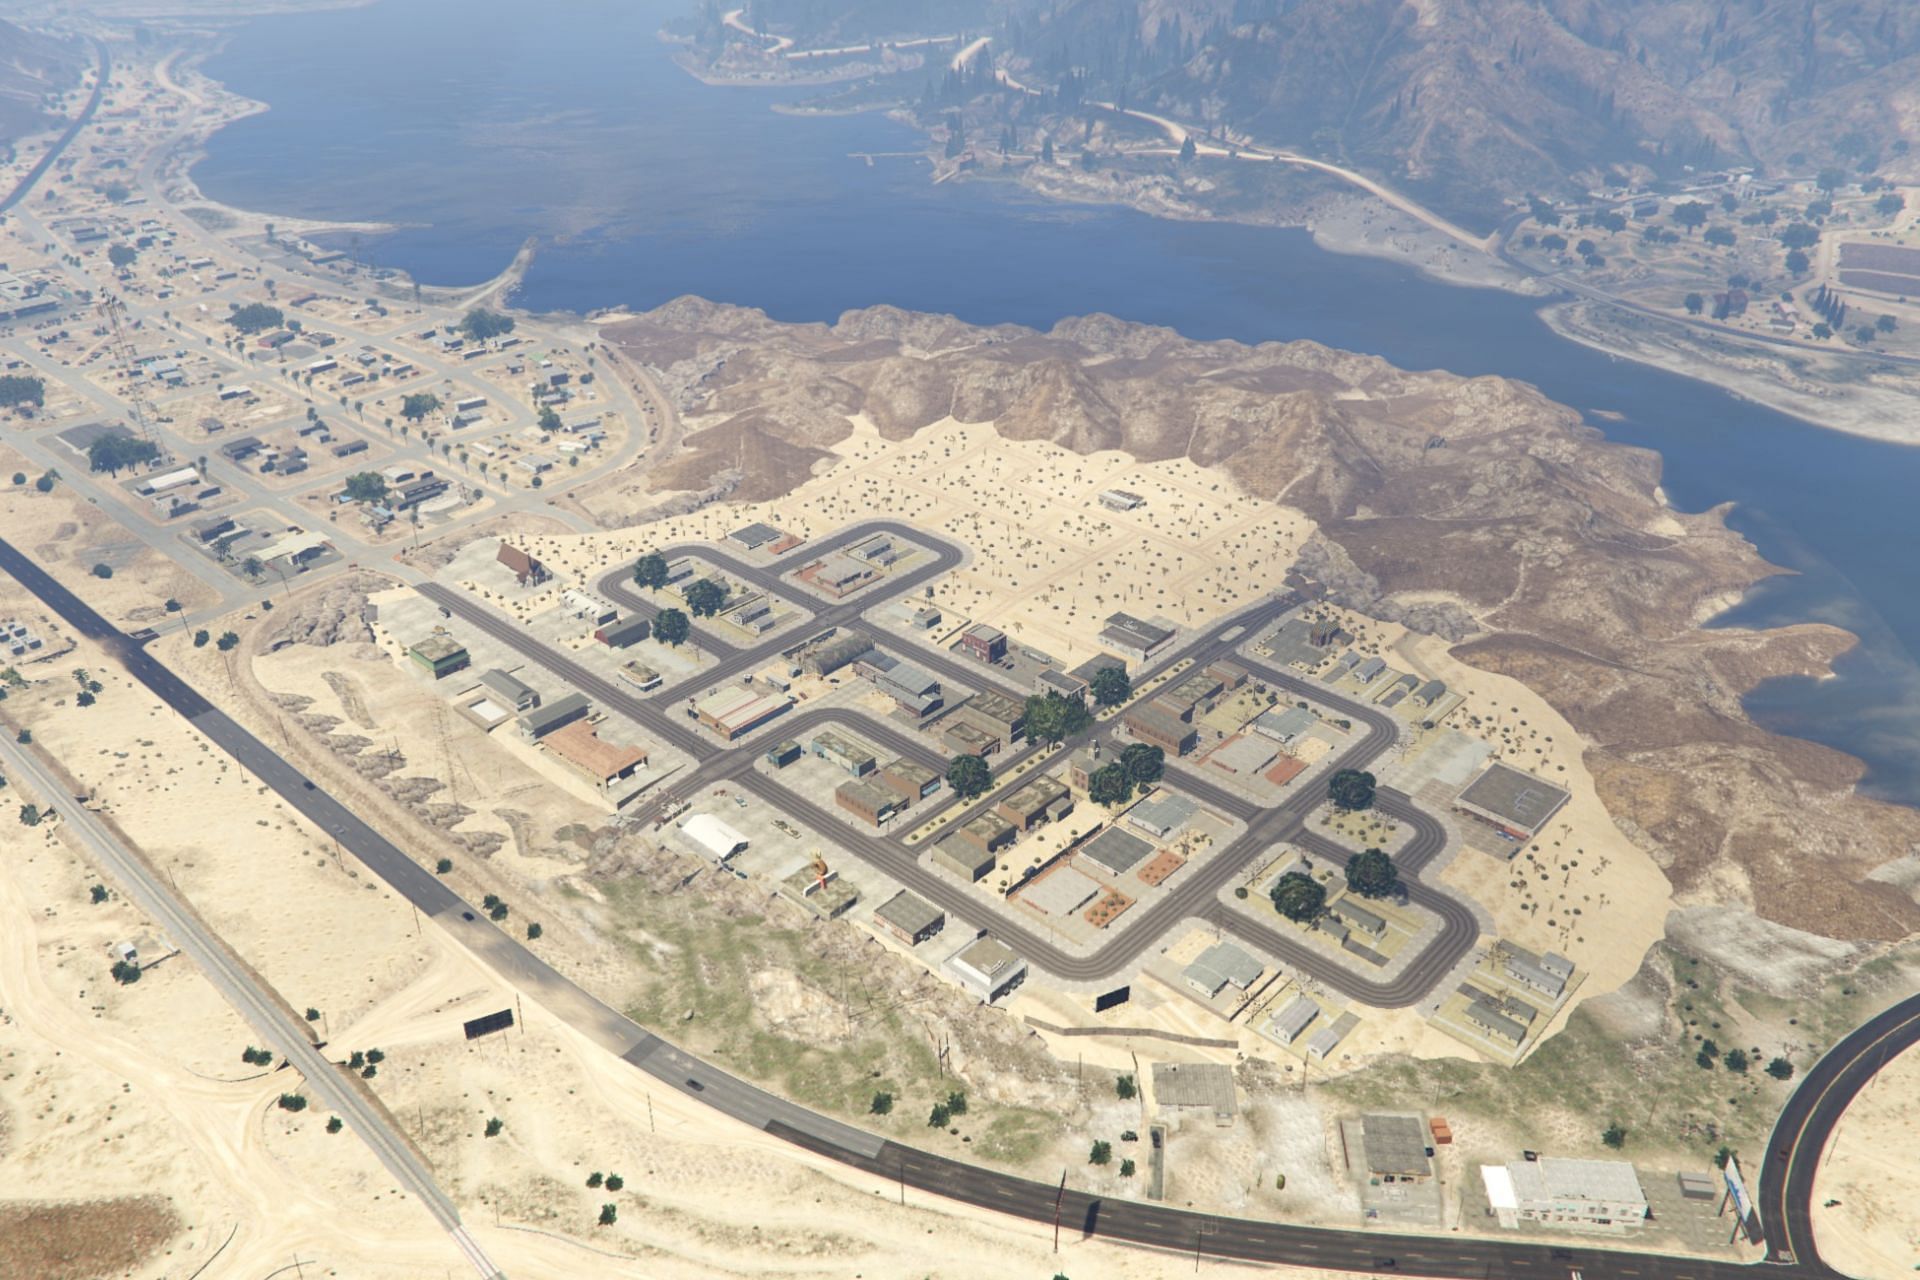 Aerial view of Carson City as seen in the mod (Image via Abrian19)